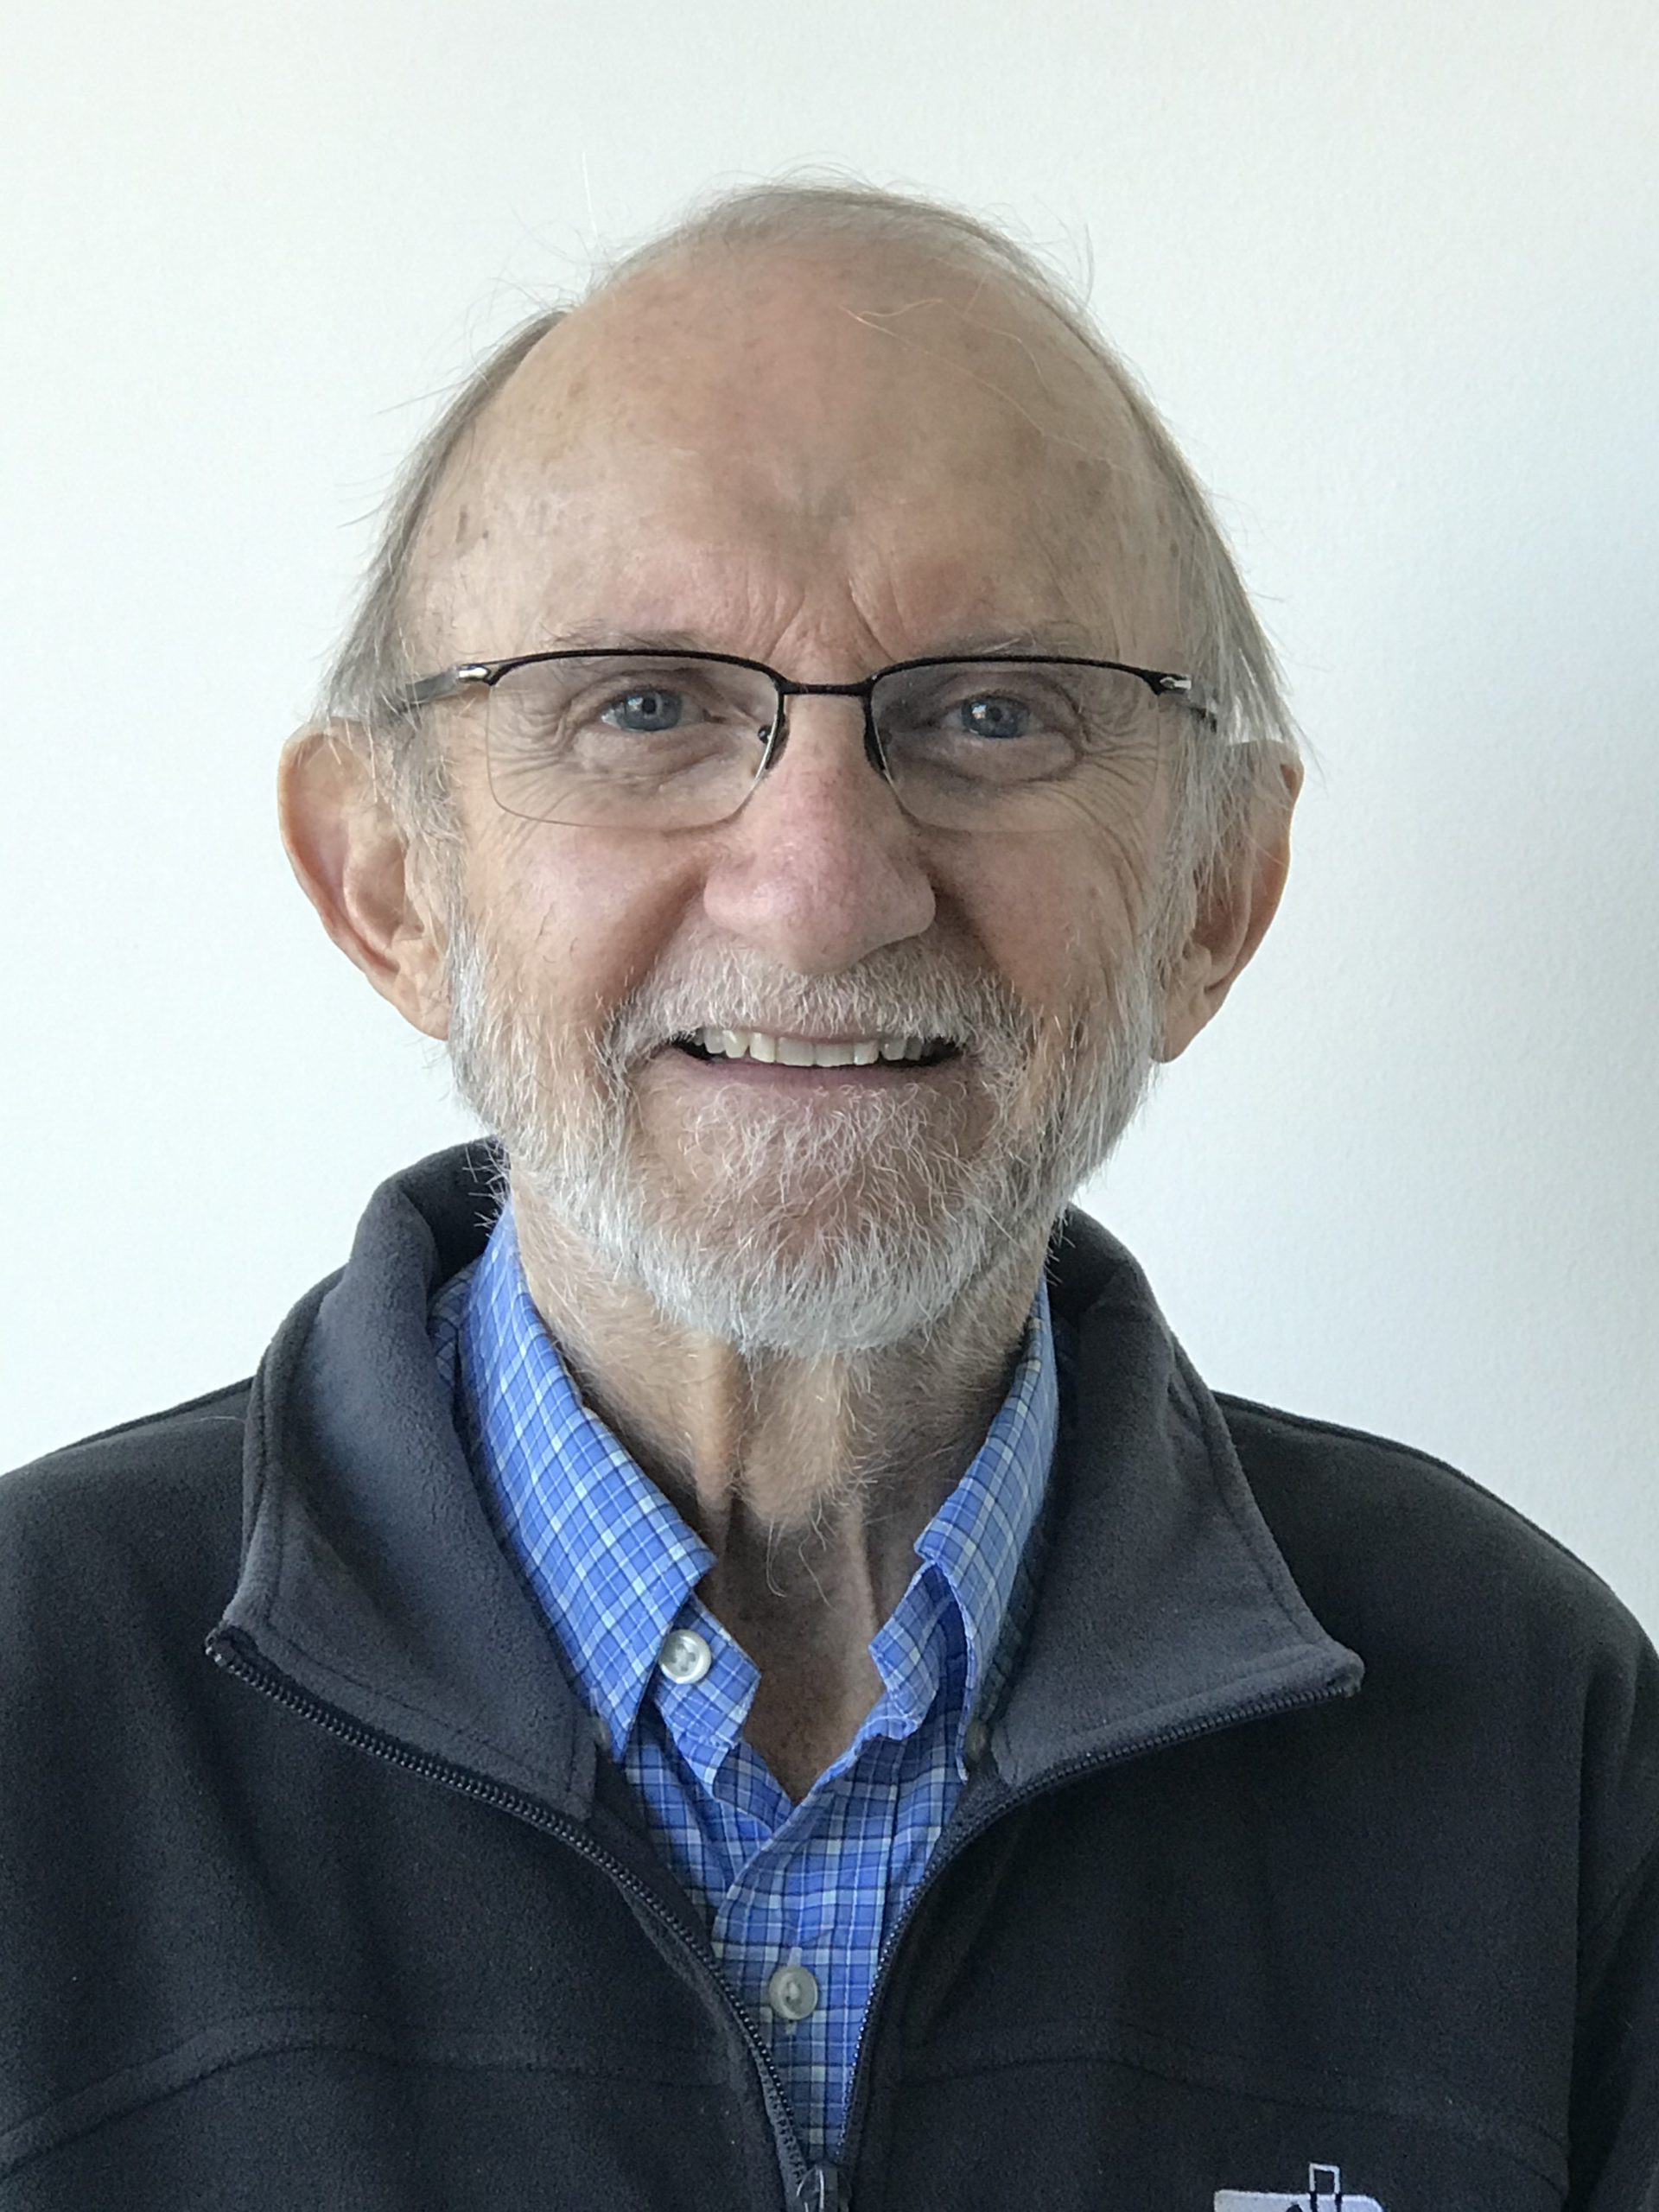 Jim Dadson's Headshot. Jim, an older man with a white beard and glasses smiles at the camera.